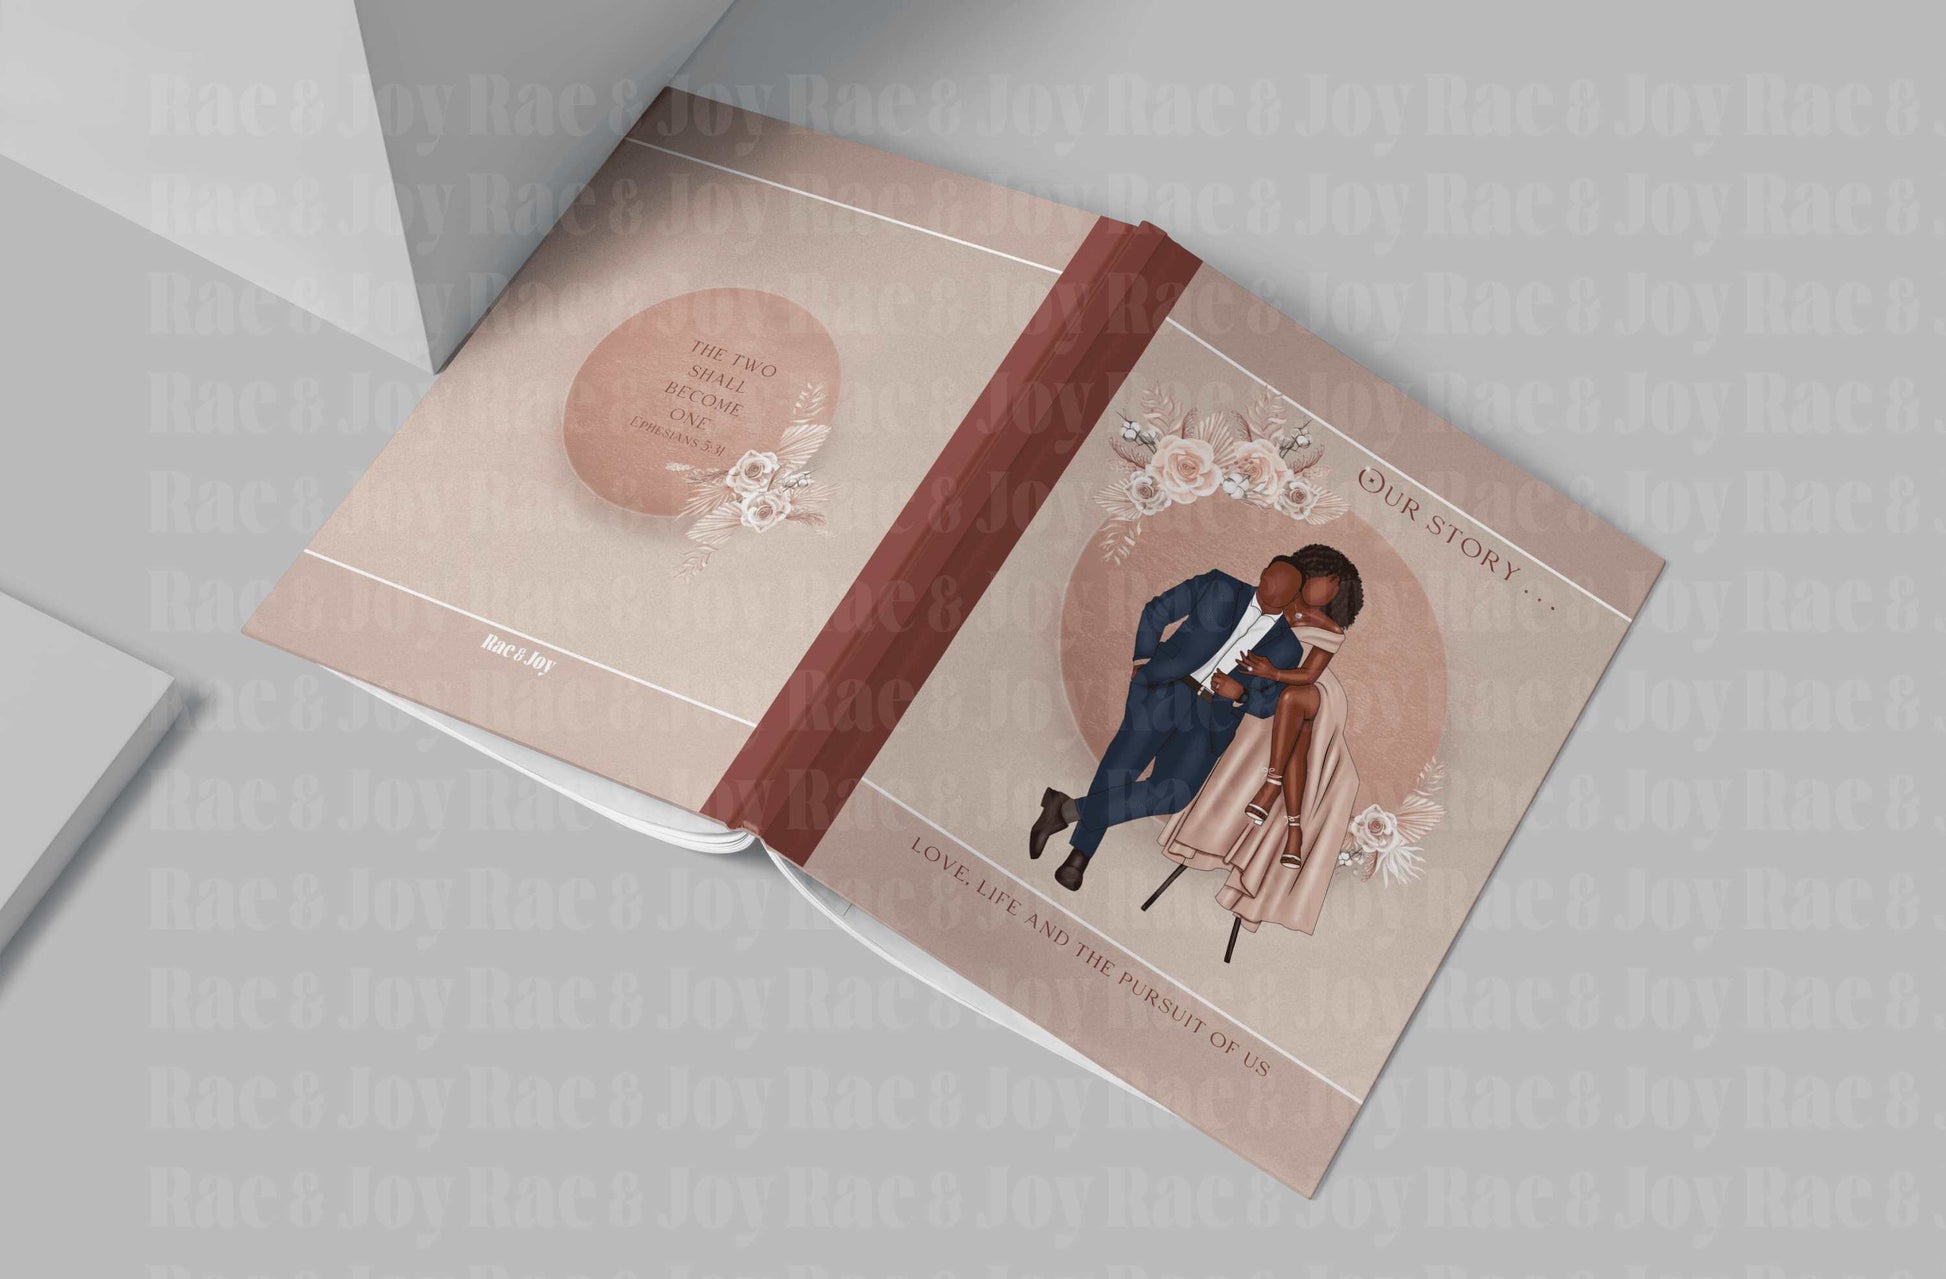 Couples Journal Our Story Journal Hardcover Couples Journal Wedding Gi –  Rae & Joy Journals, Planners & More